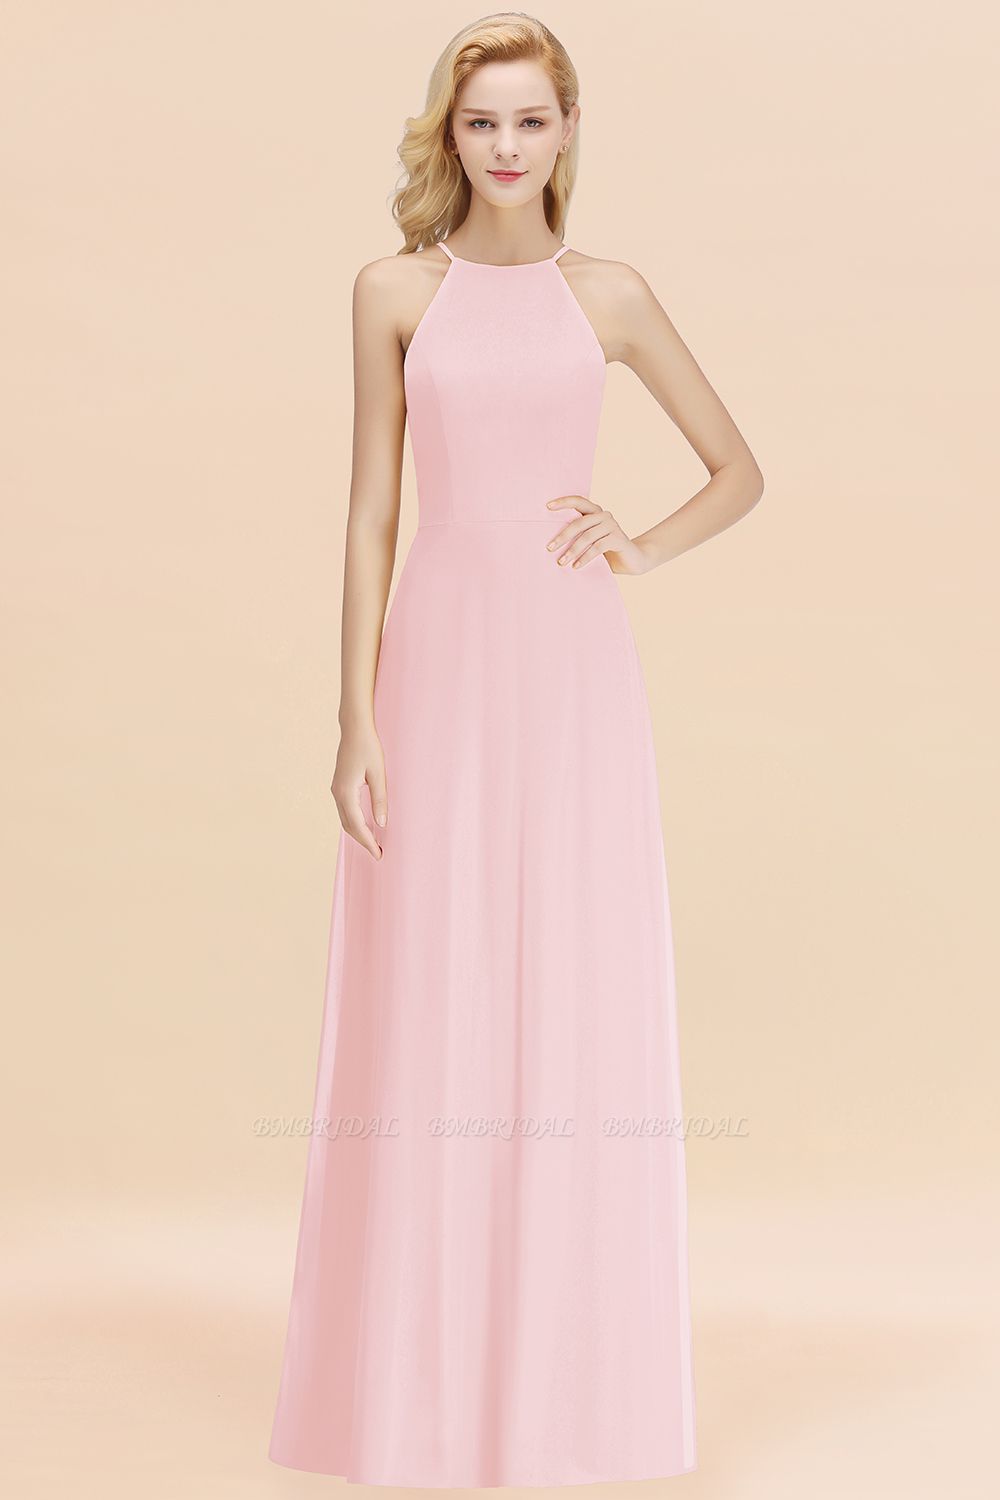 BMbridal Modest High-Neck Yellow Chiffon Affordable Bridesmaid Dresses Online